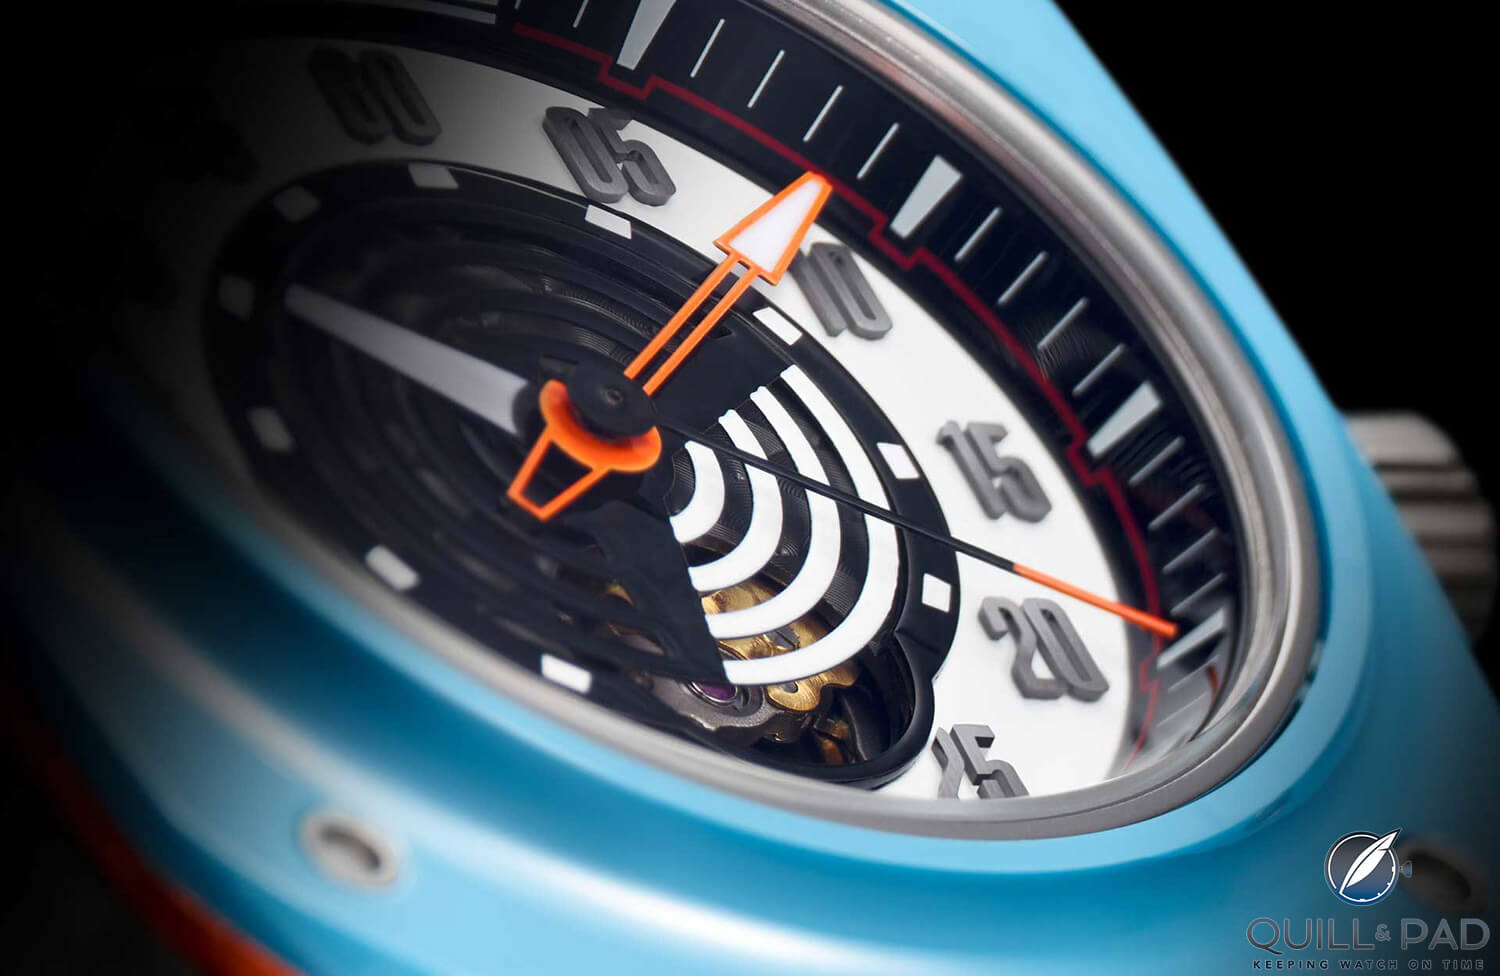 3 dimensional applied numerals add depth to the dial of the Gorilla Watches Fastback GT Mirage